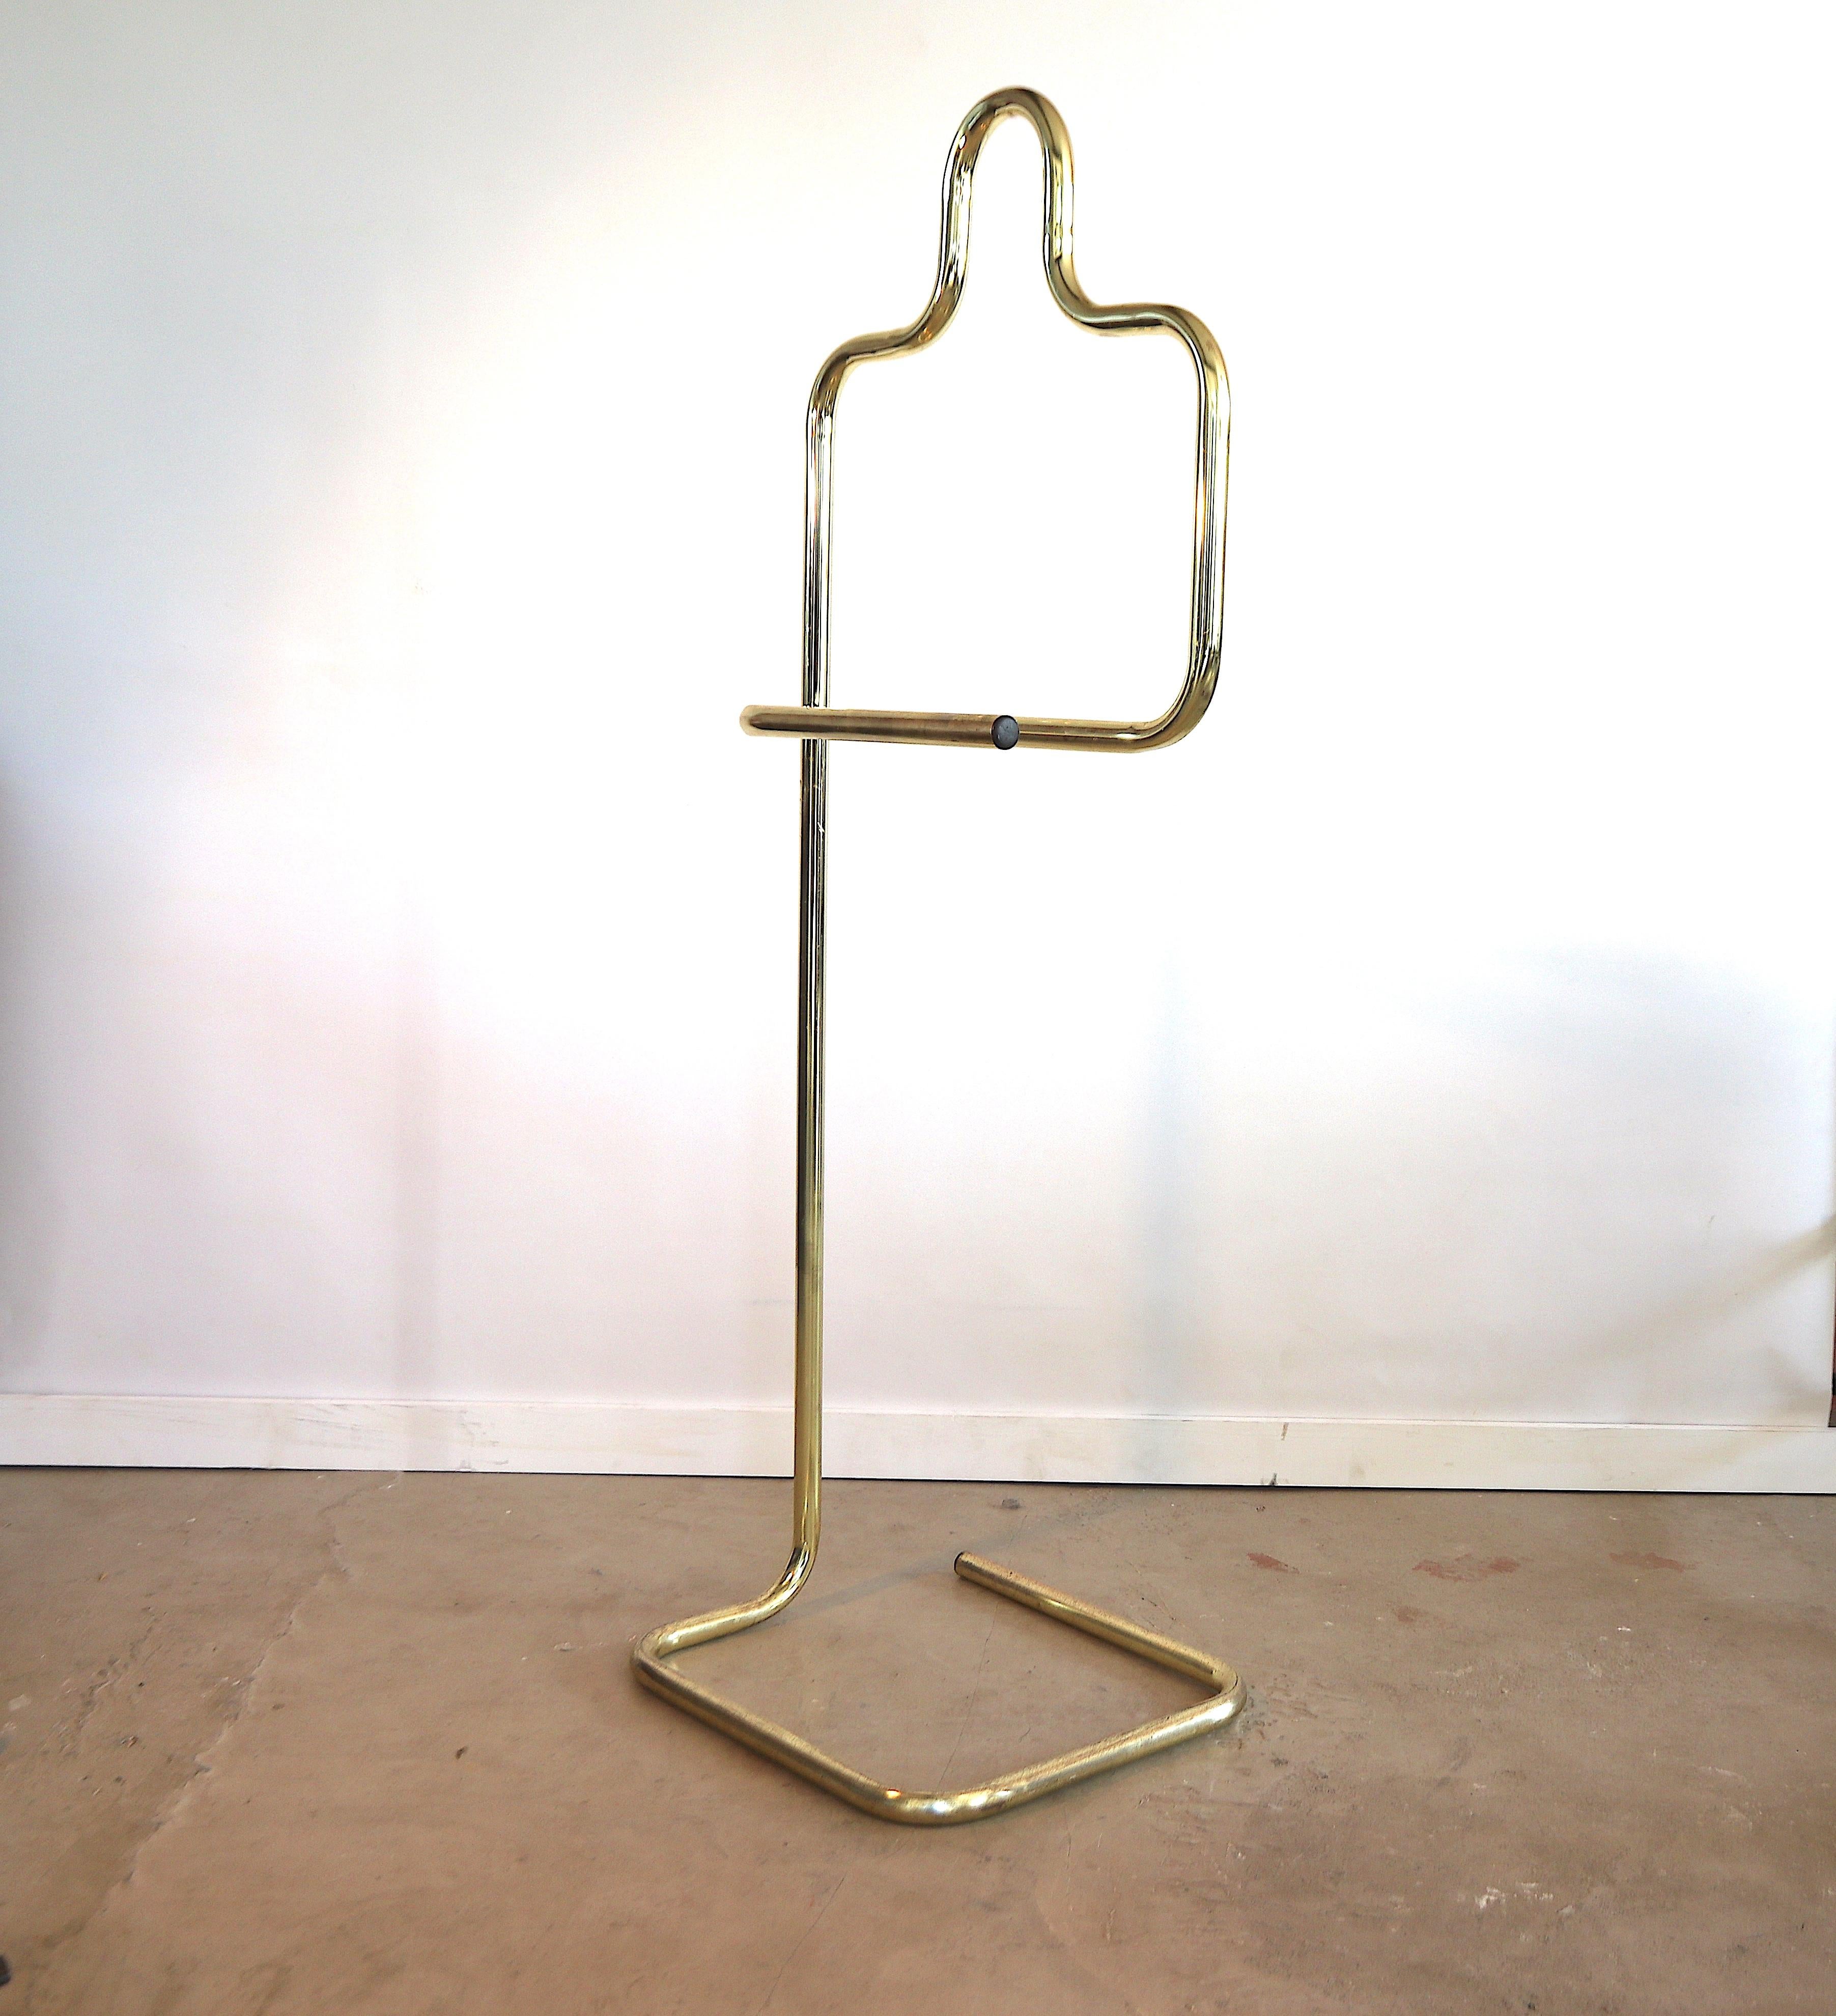 Very chic and shiny polished brass dressdoy / dress boy of the Italian midcentury design brand Morex. Smoothly designed minimalistic yet Hollywood Regency chic, sculptural piece to hang your complete outfit ready to put on the next day. Also when